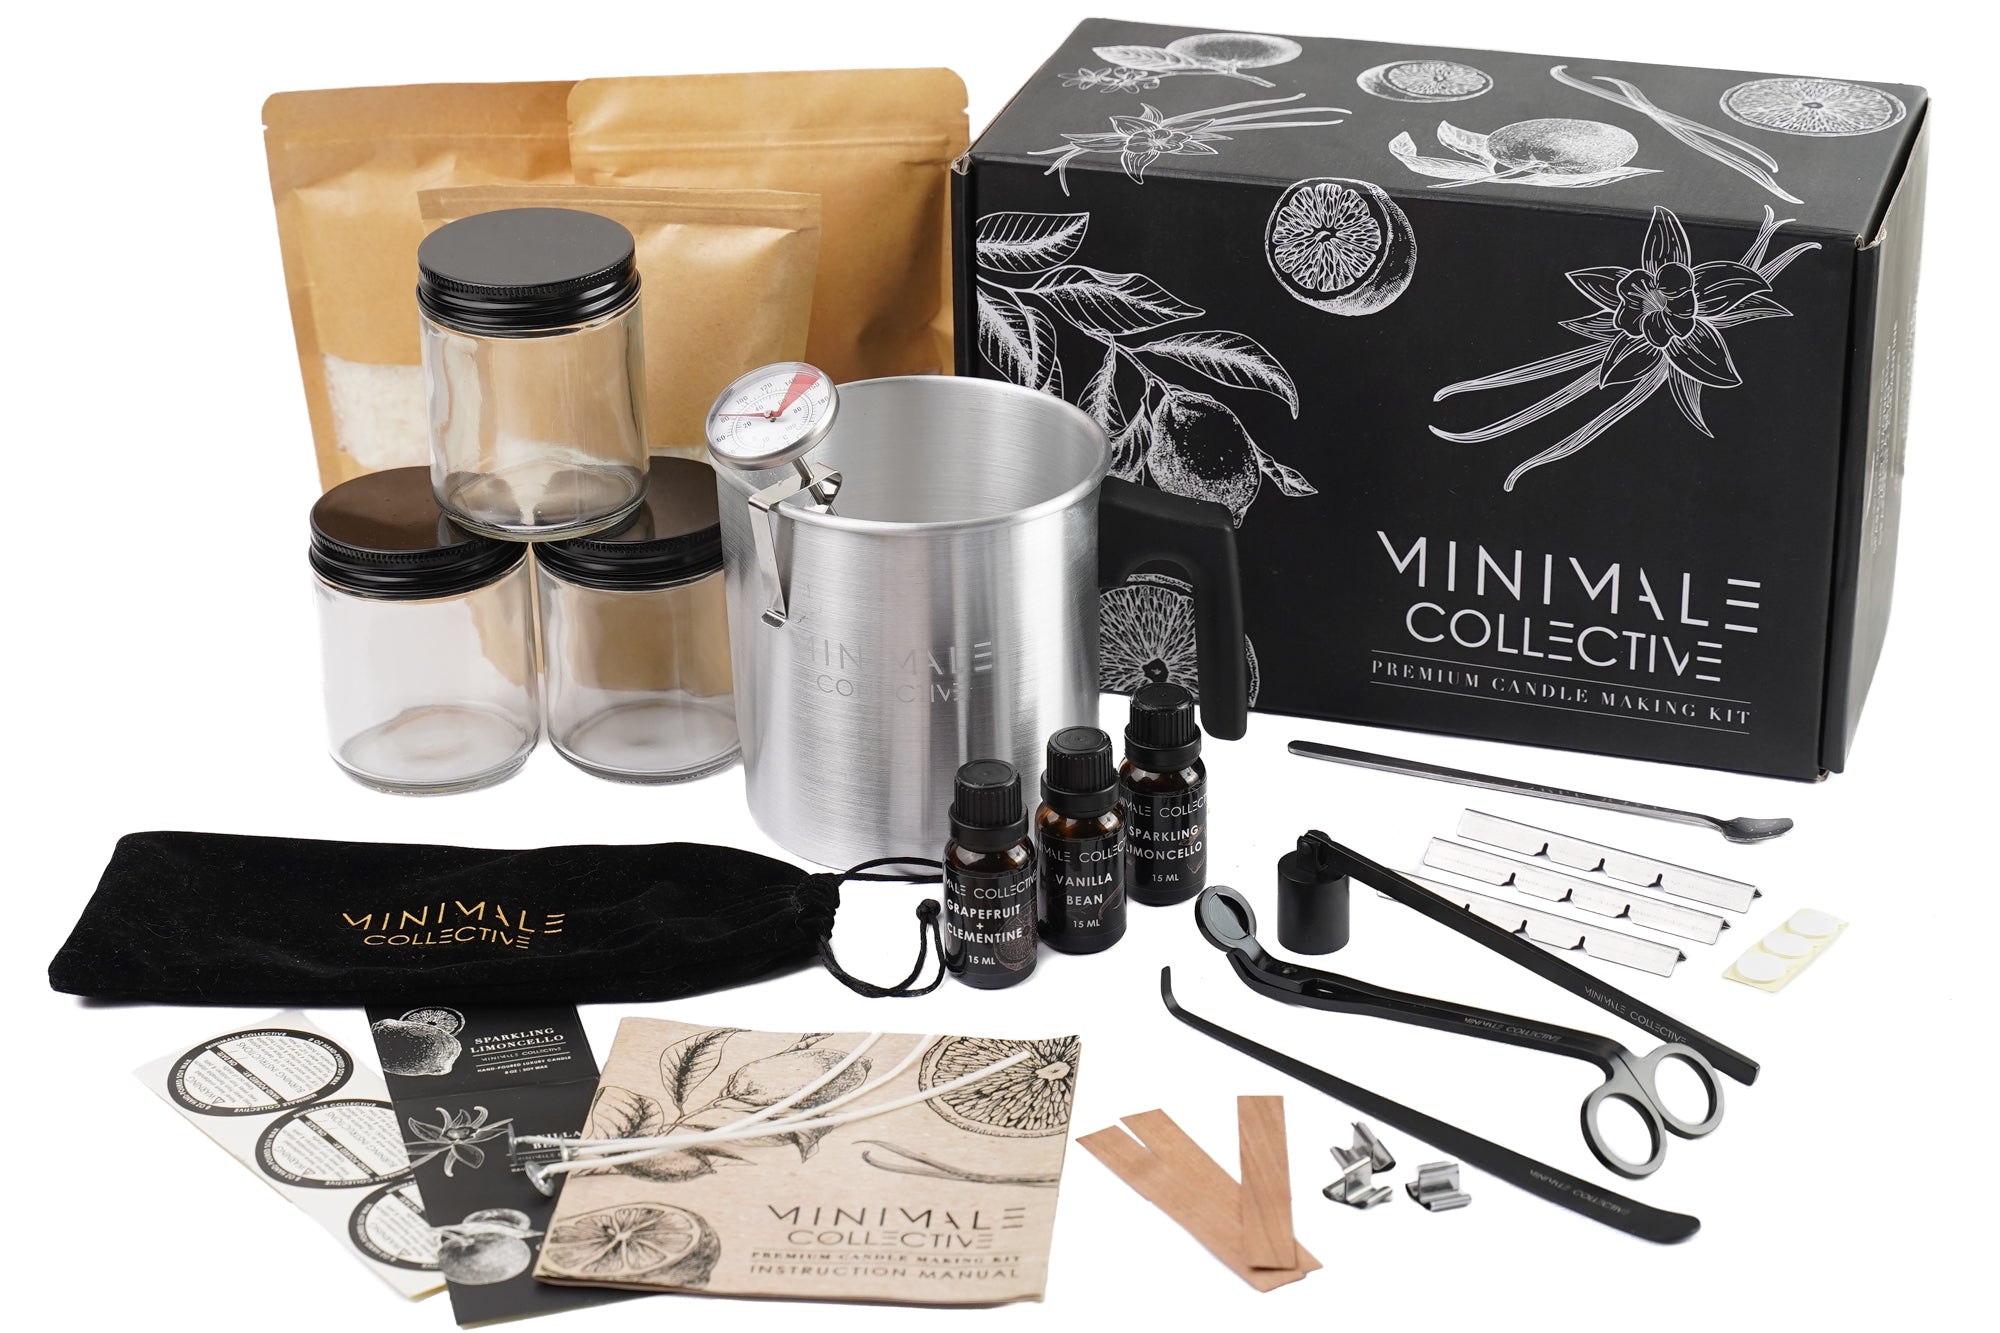 Corporate Candle Making Kits